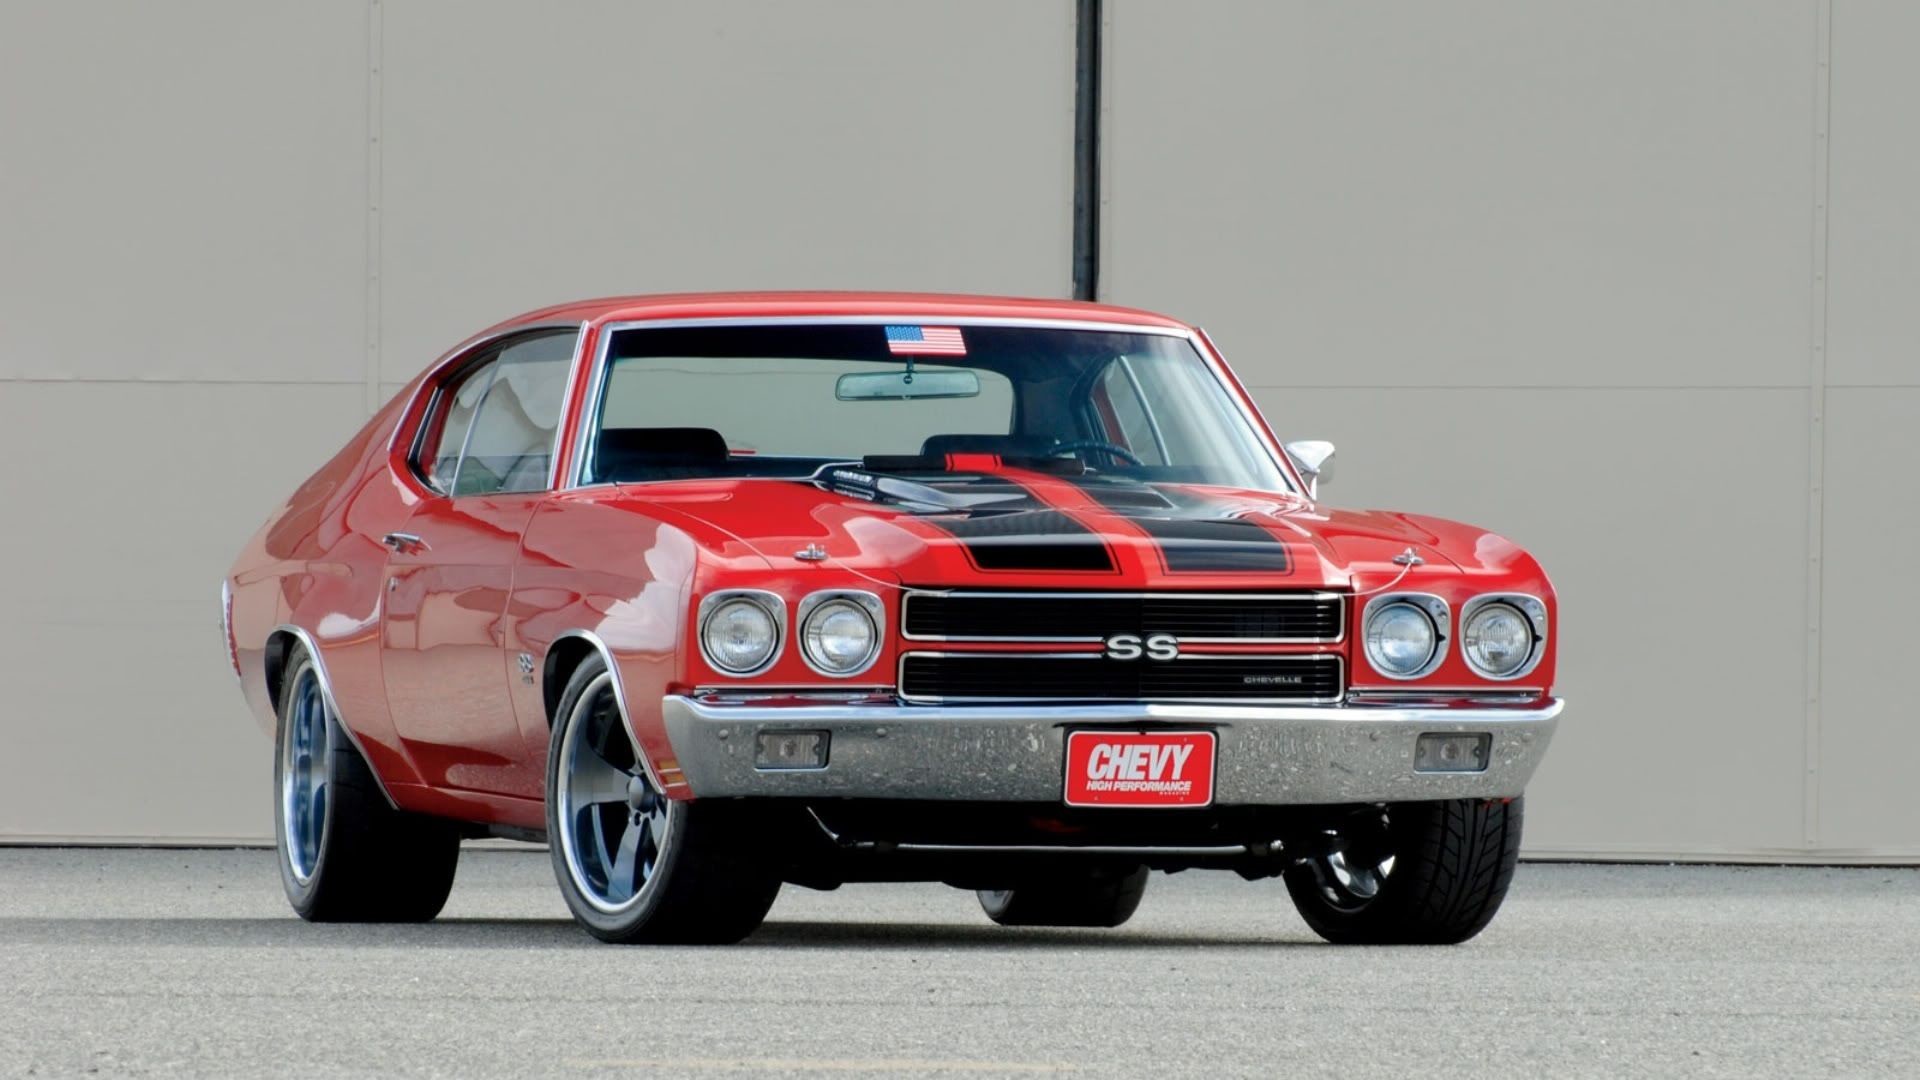 1970 Red Chevy Chevelle SS 454 wallpaper 37008